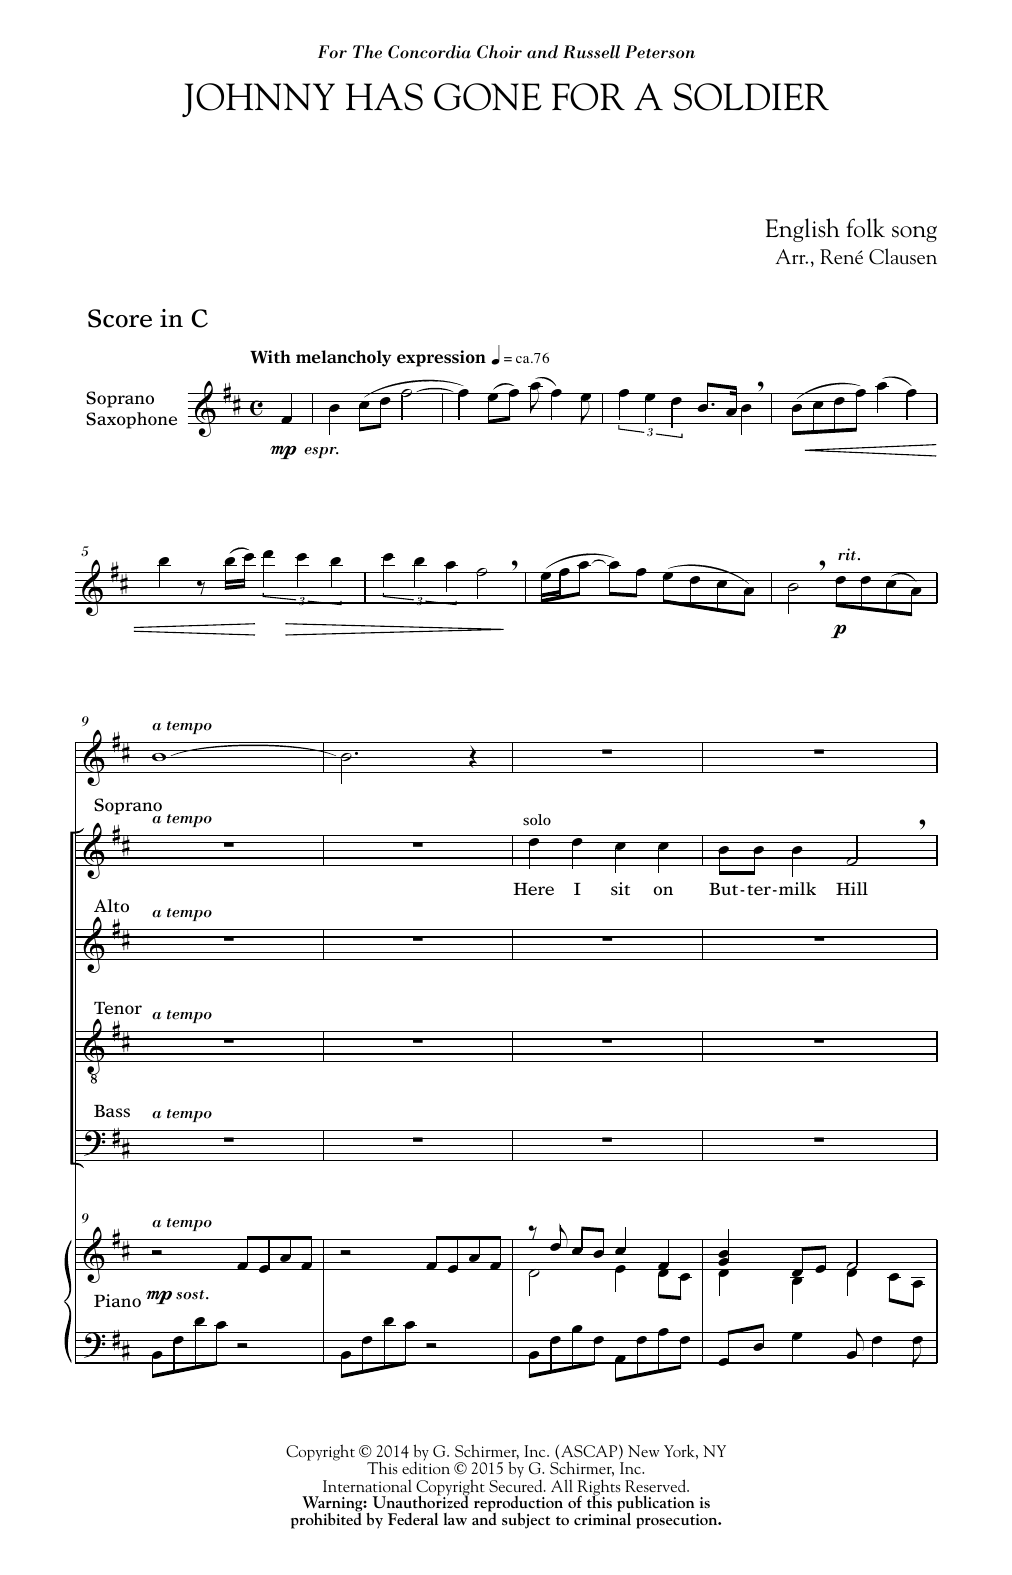 Download Rene Clausen Johnny Has Gone For A Soldier Sheet Music